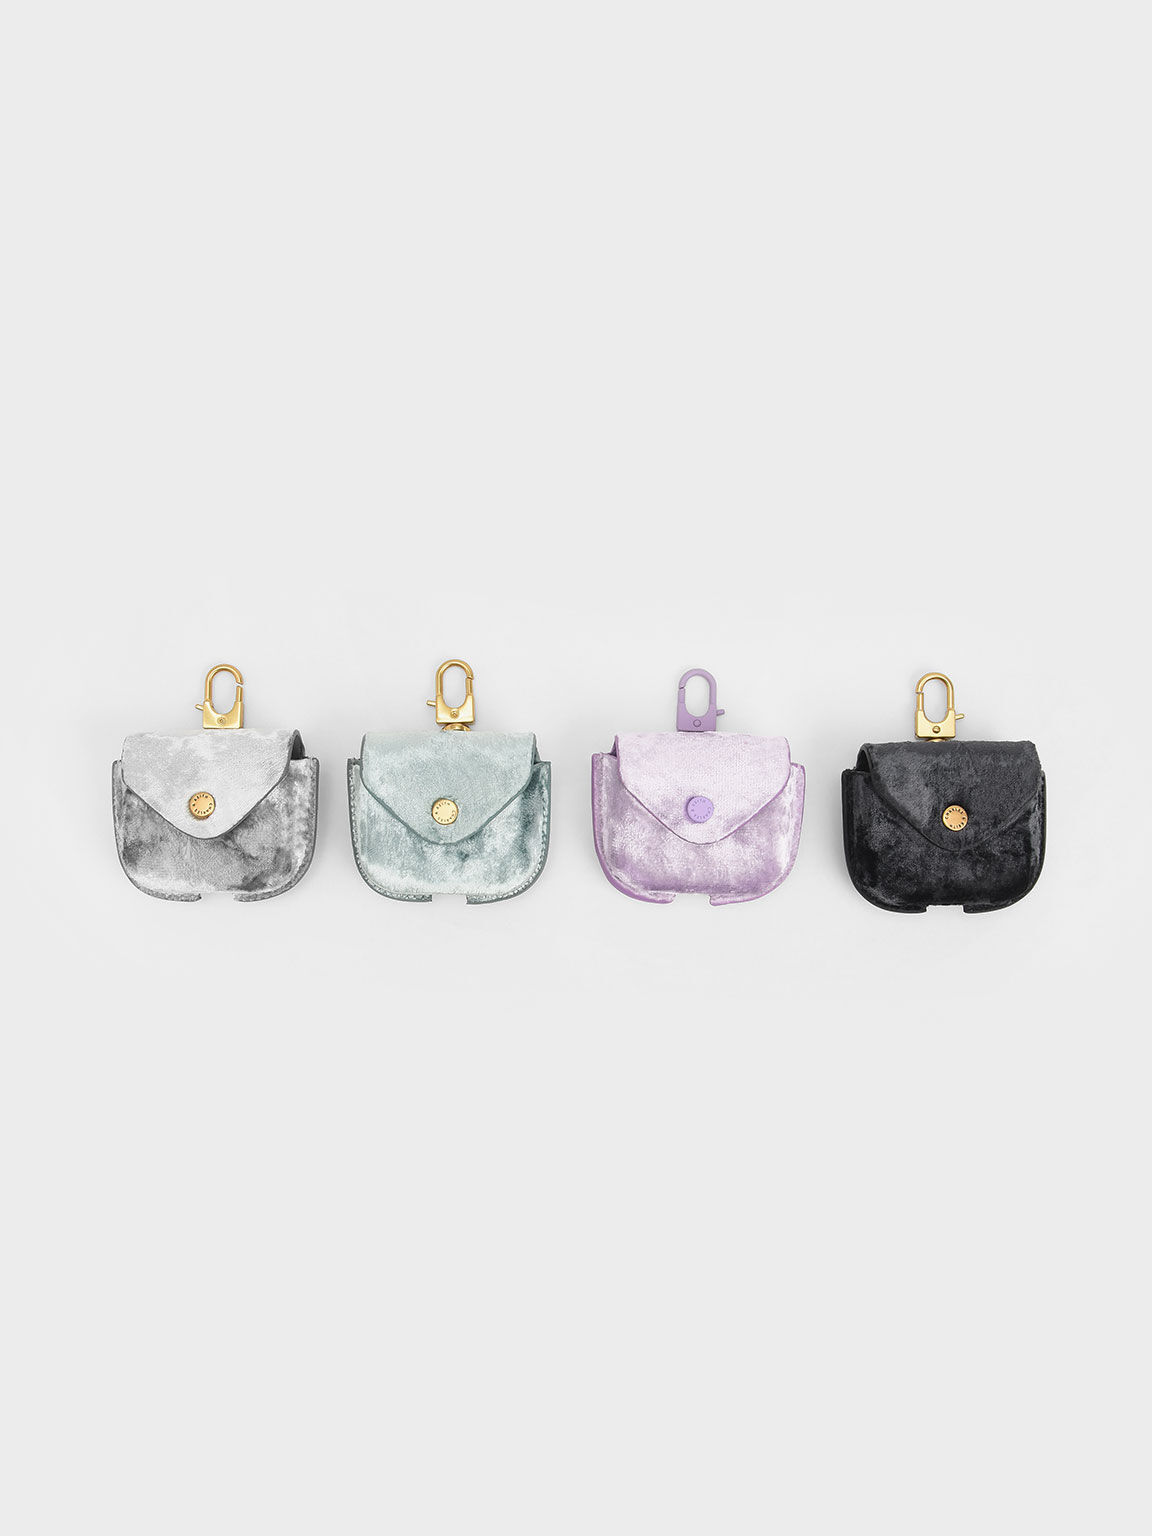 Holiday 2021 Collection: Chantria Velvet AirPods Pouch, Black, hi-res